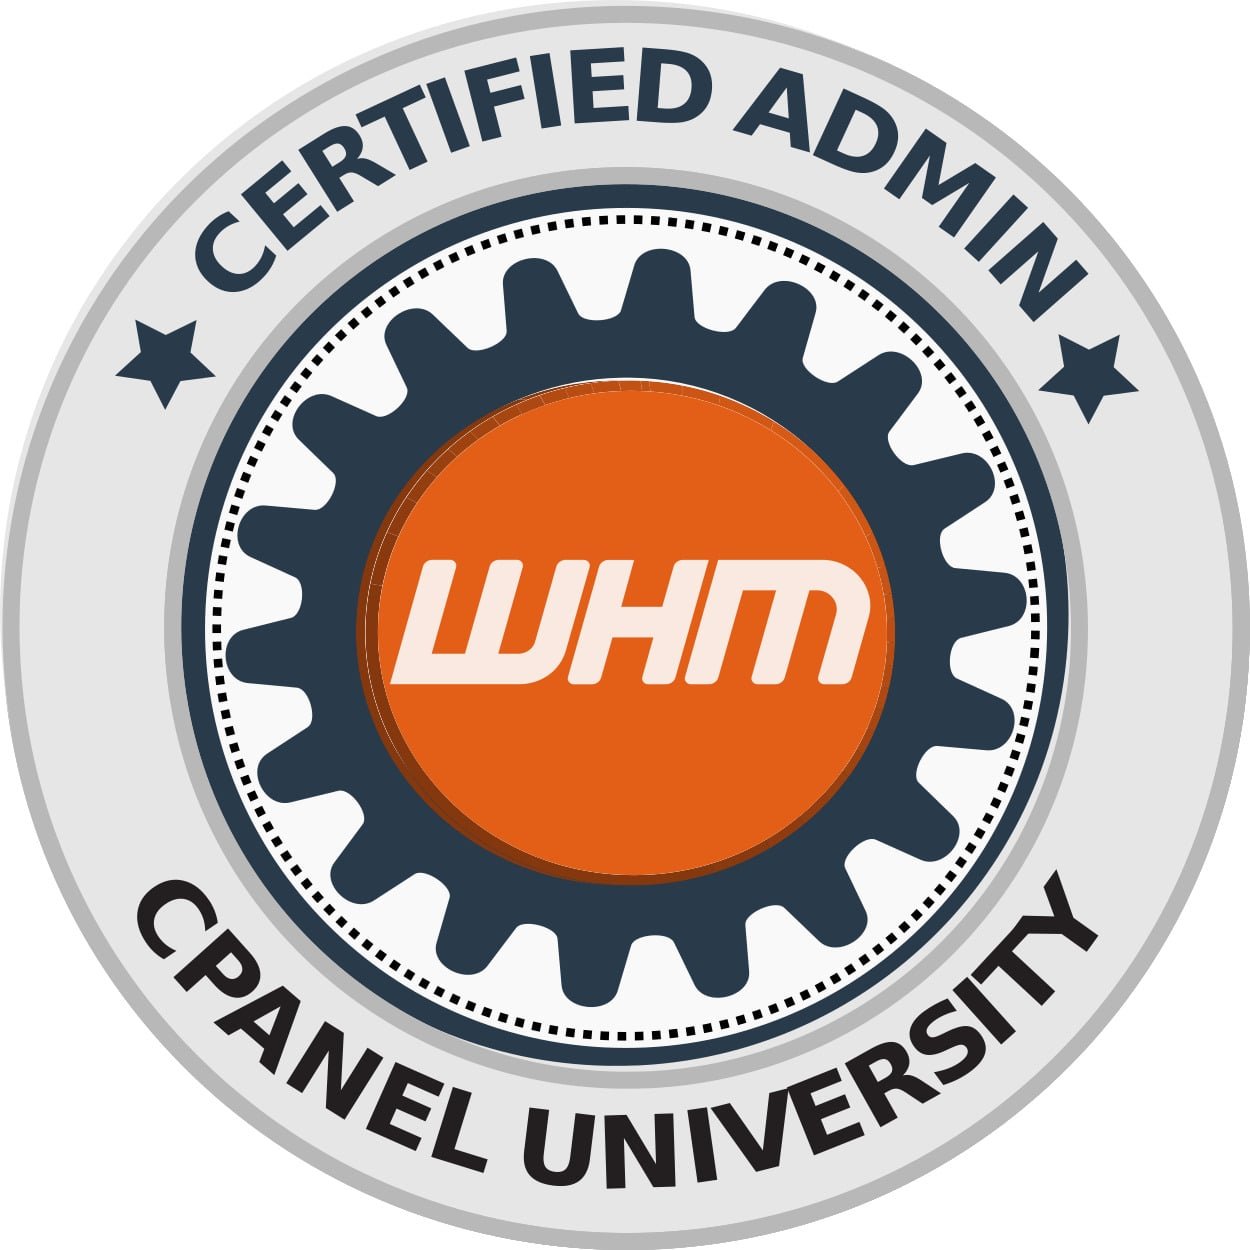 cPanel University WHM Certified Administrator Badge